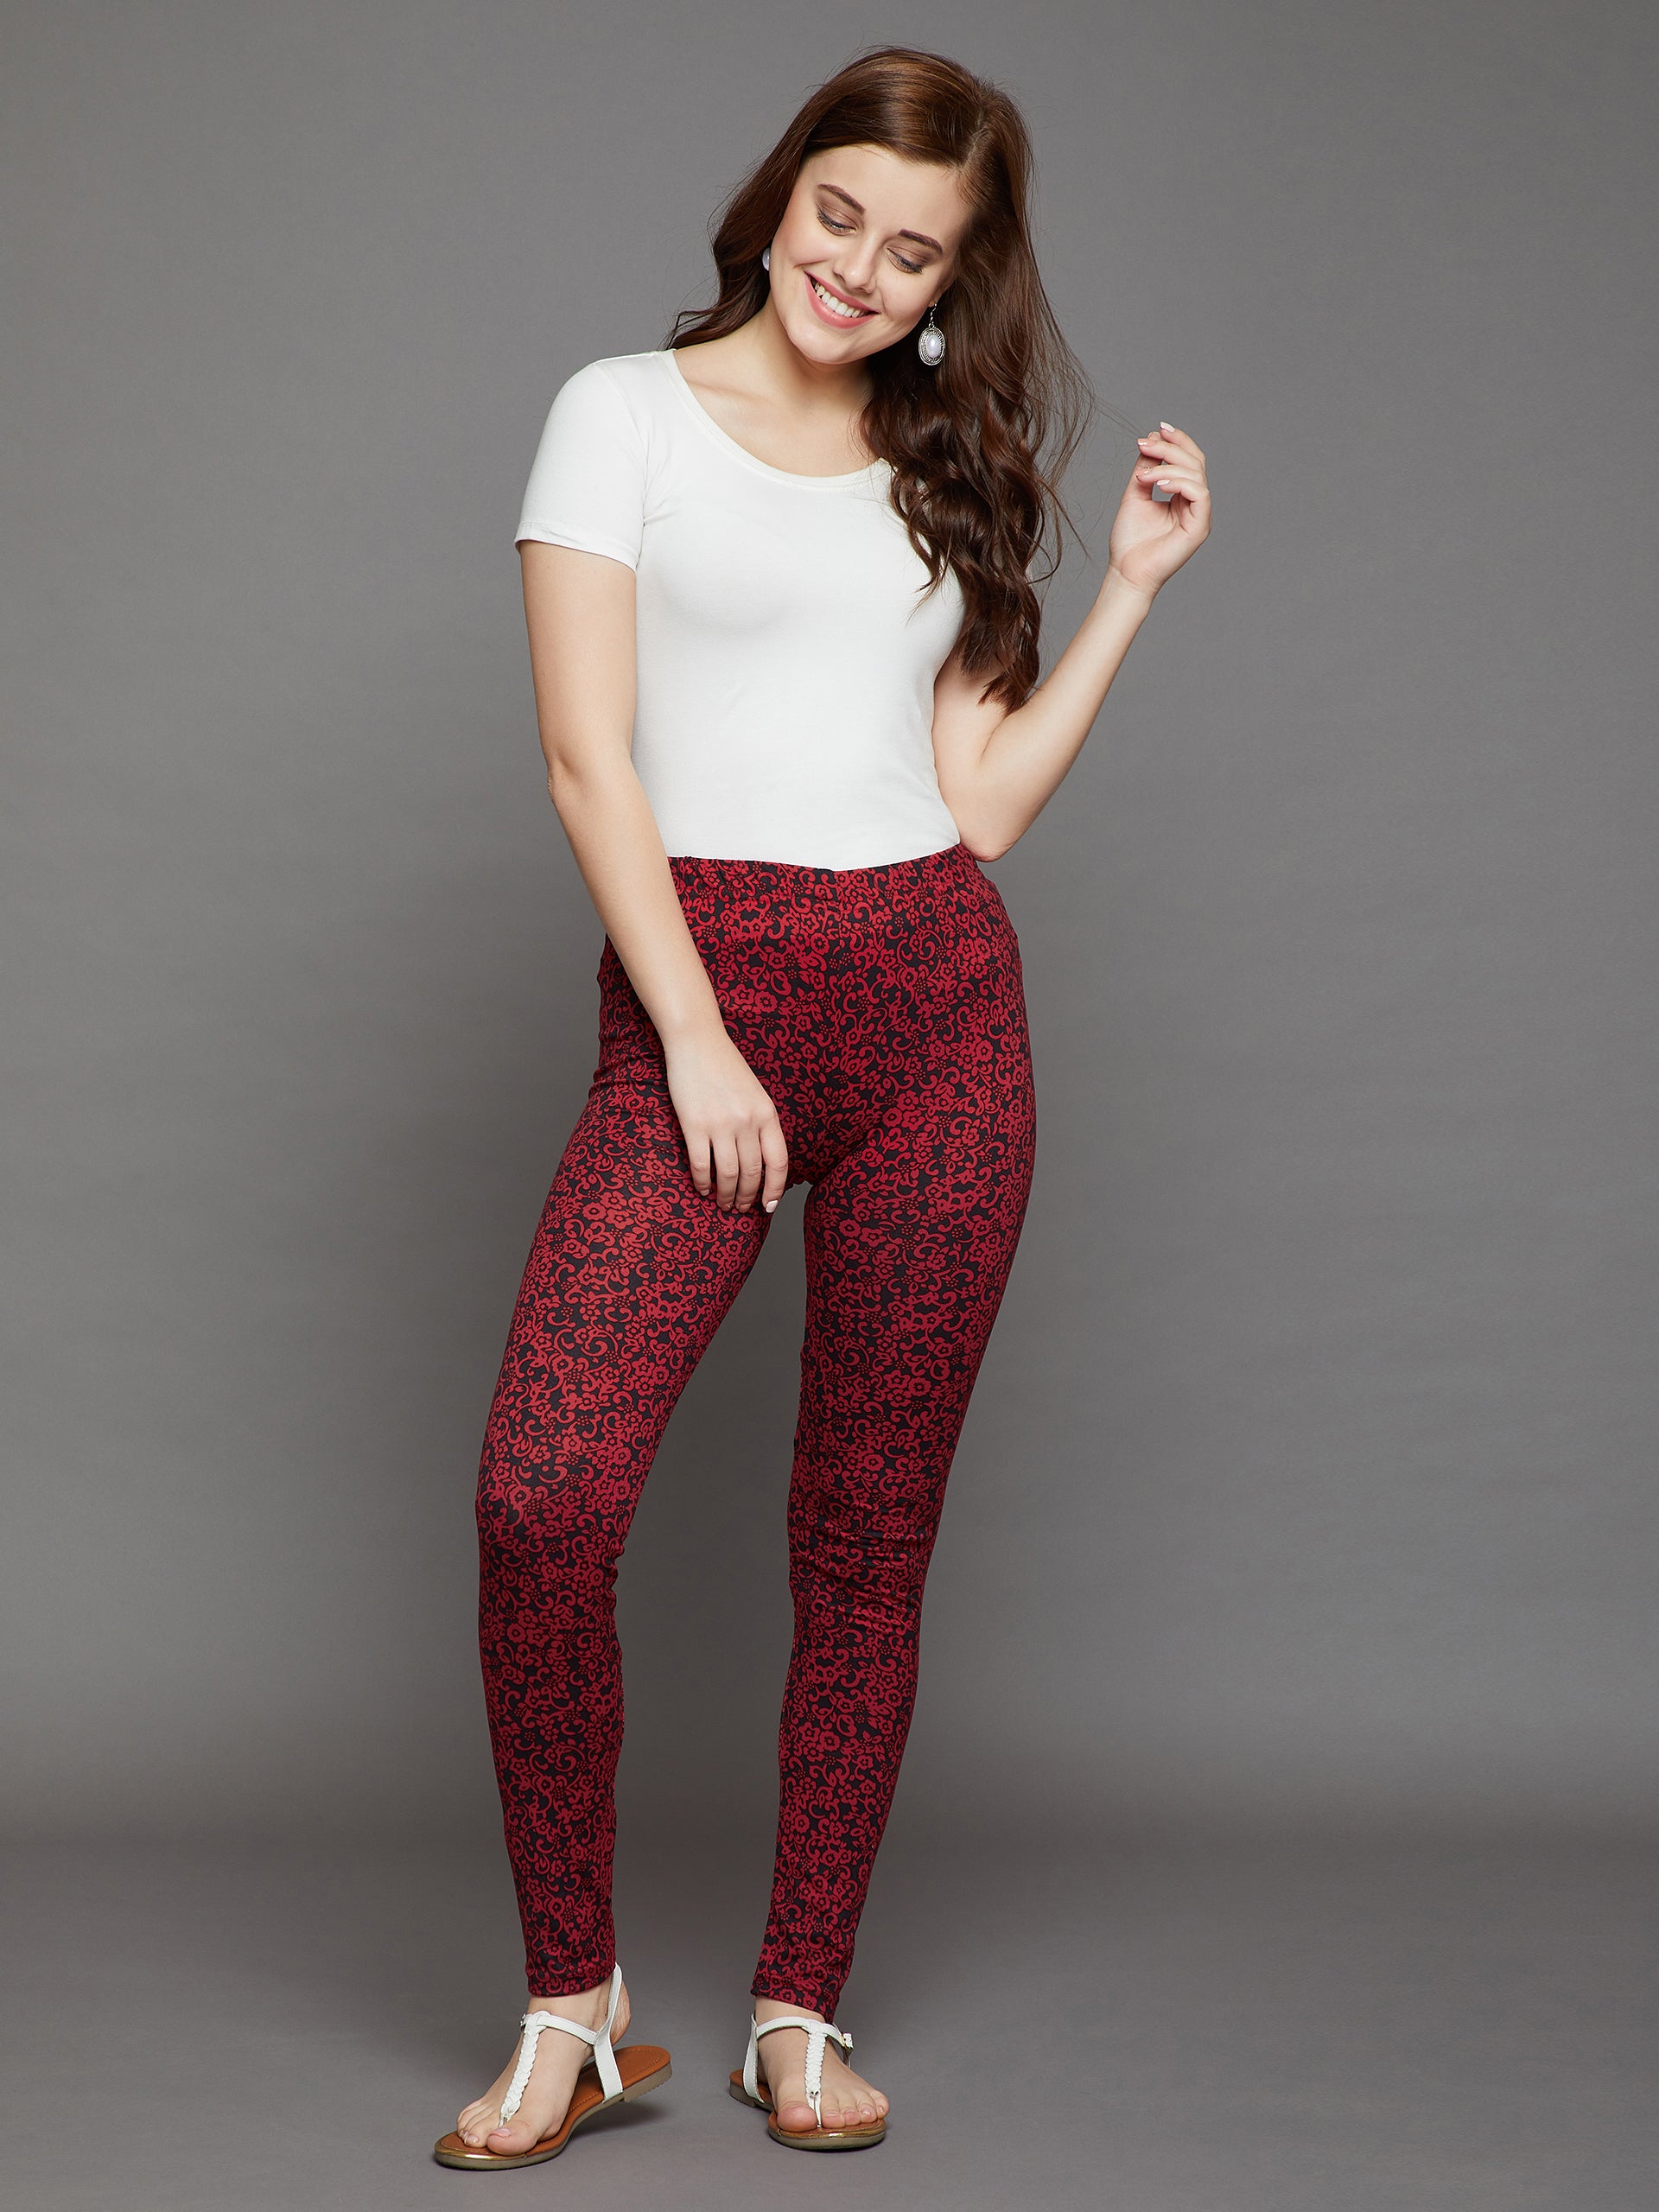 Casual Wear Ladies Printed Legging, Size: S, M, L & XL at Rs 80 in